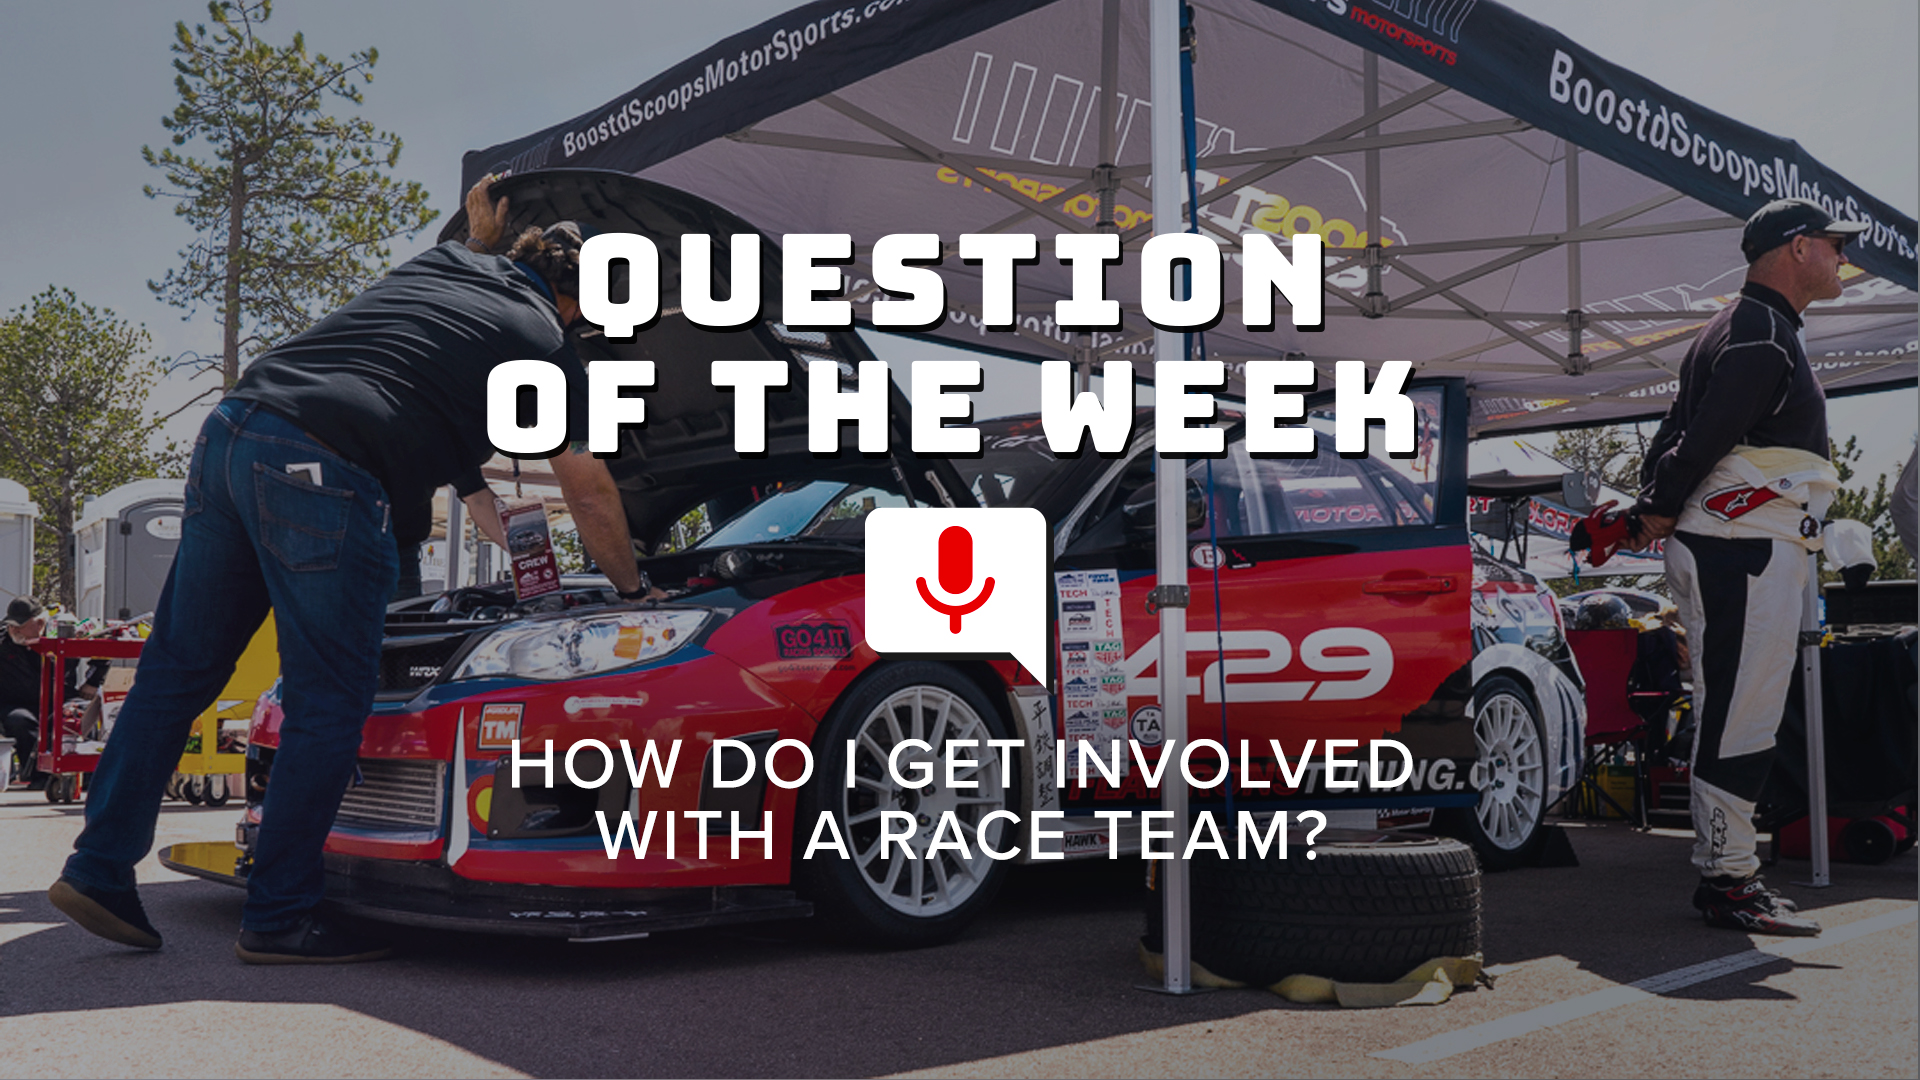 How can I get involved with a Race Team?